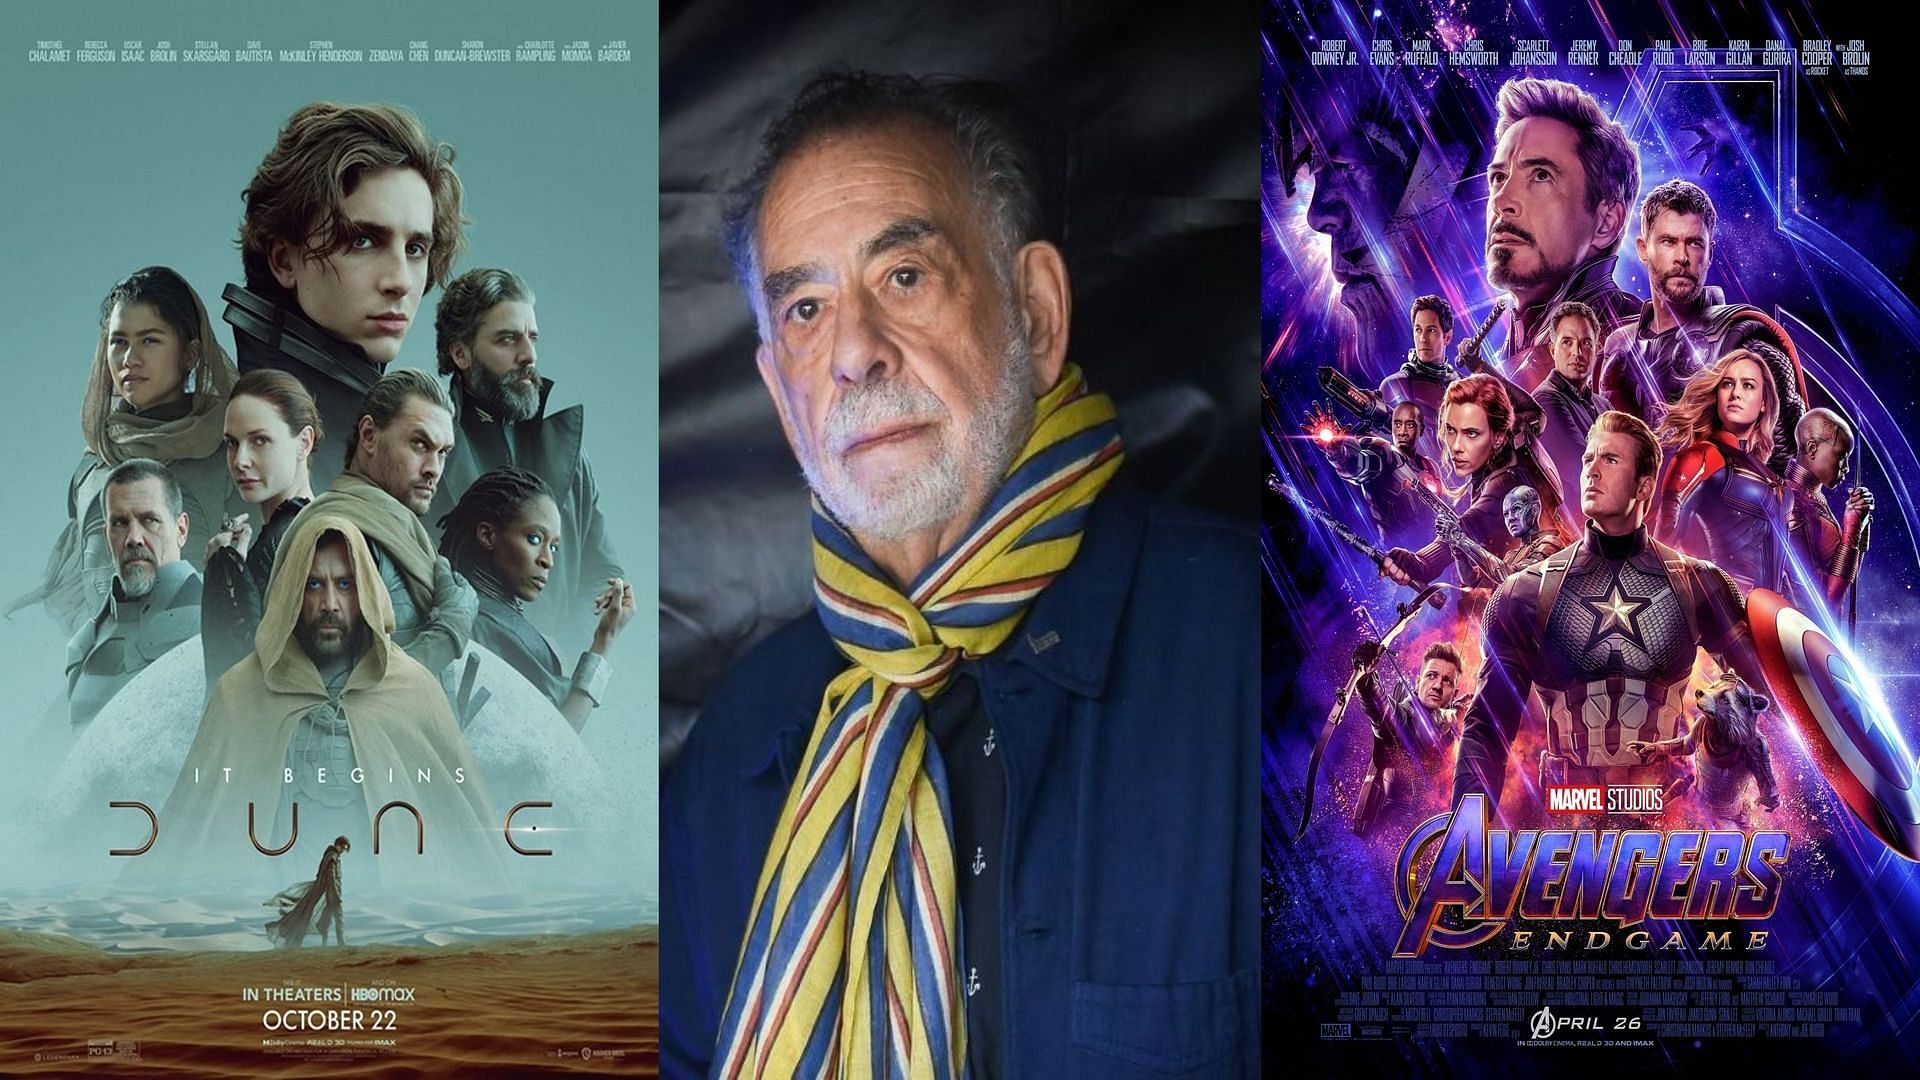 Francis Ford Coppola hits back against MCU films and studio films like Dune (Image via Warner Bros., Stephane Cardinale - Corbis/Getty Images, and Marvel Studios)